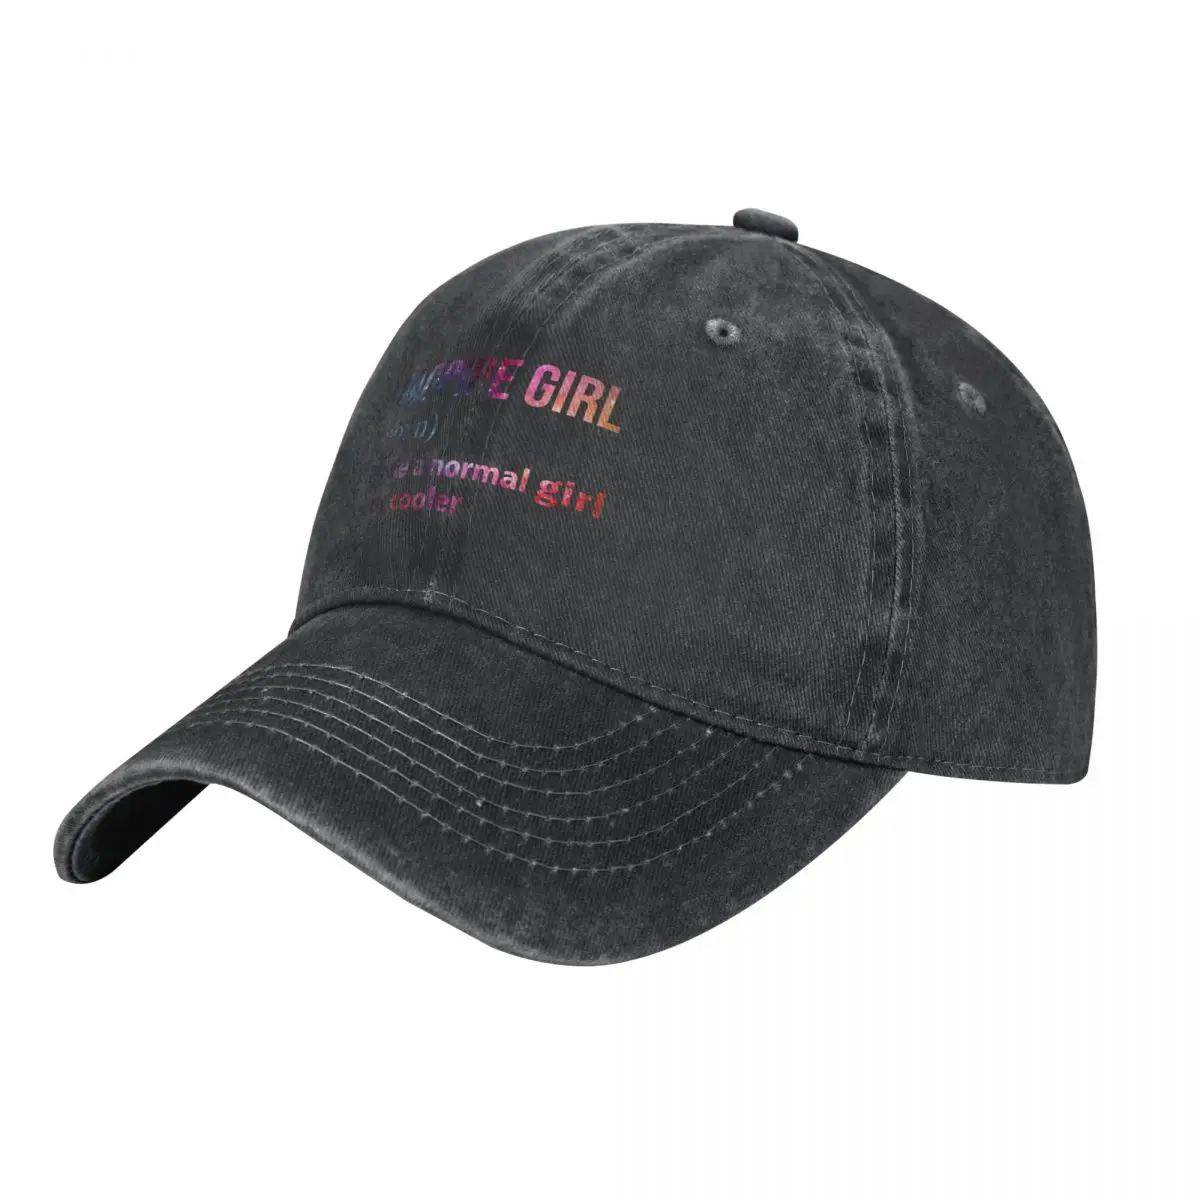 

Bagpipe Girl like a normal Girl but cooler galaxy Cowboy Hat Anime Ball Cap Hat Luxury Brand Luxury Woman Men's